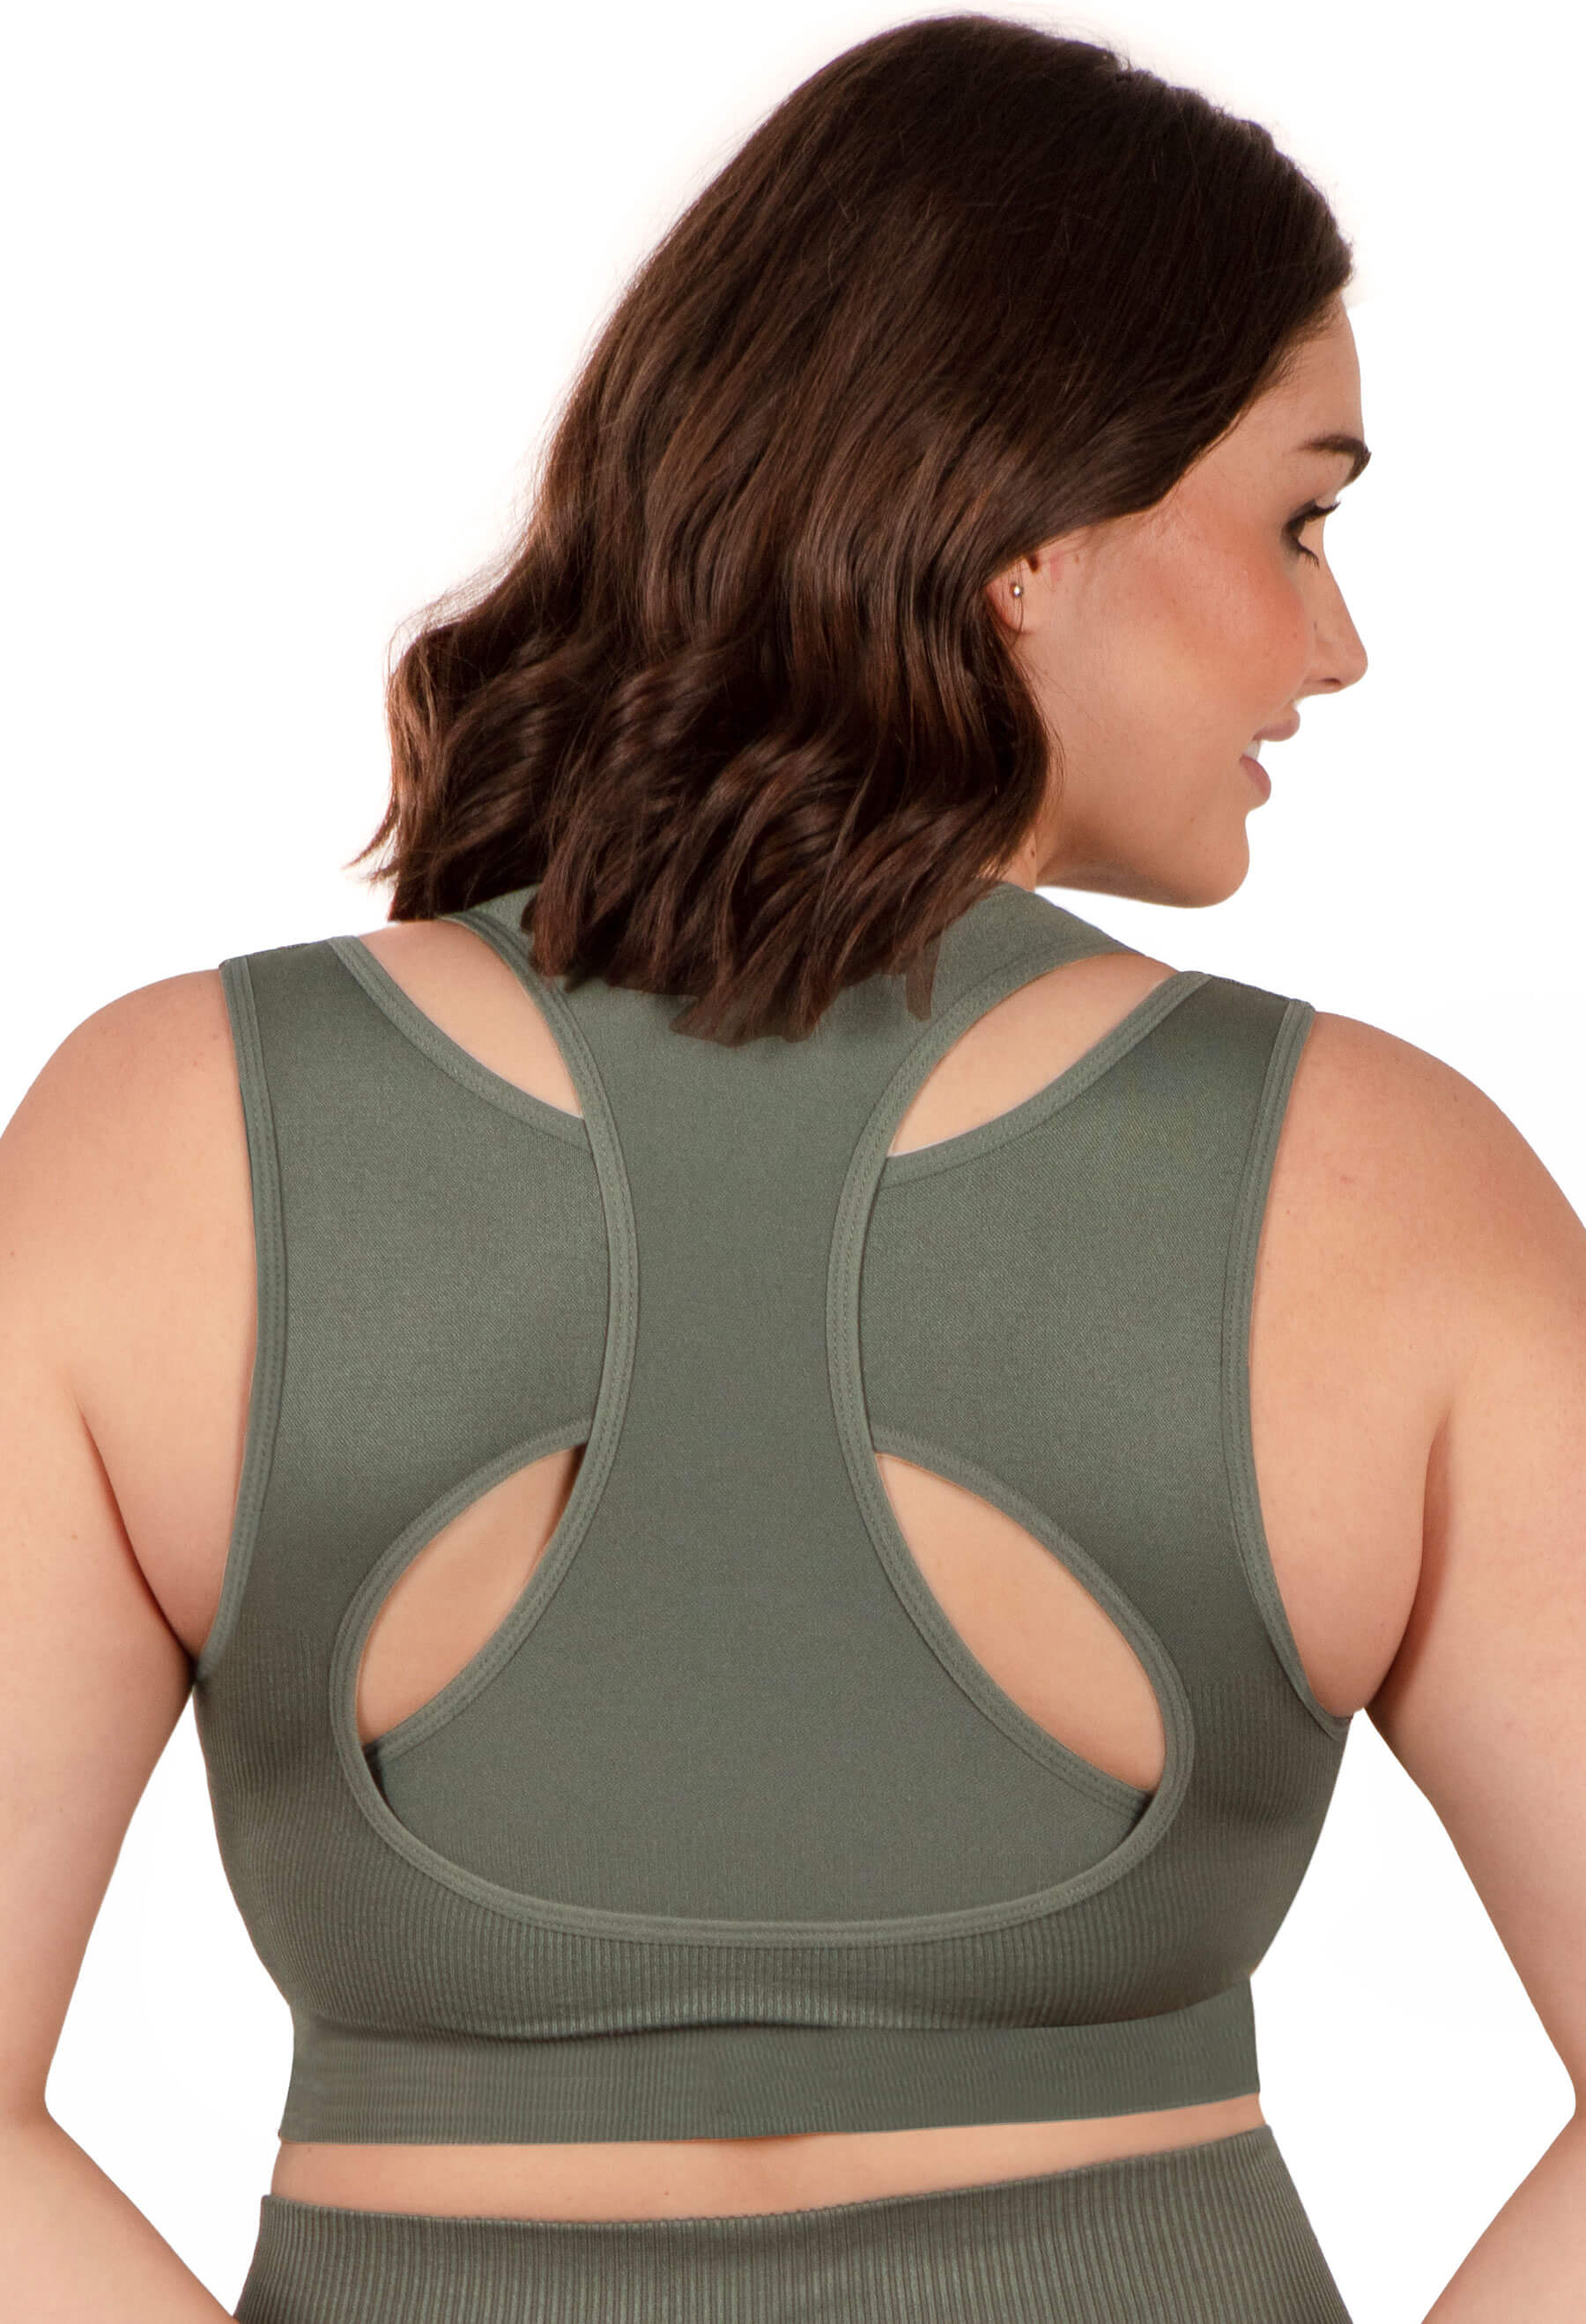 Best Sports Bra For Big Boobs  Top 10 Sports Bras For Large